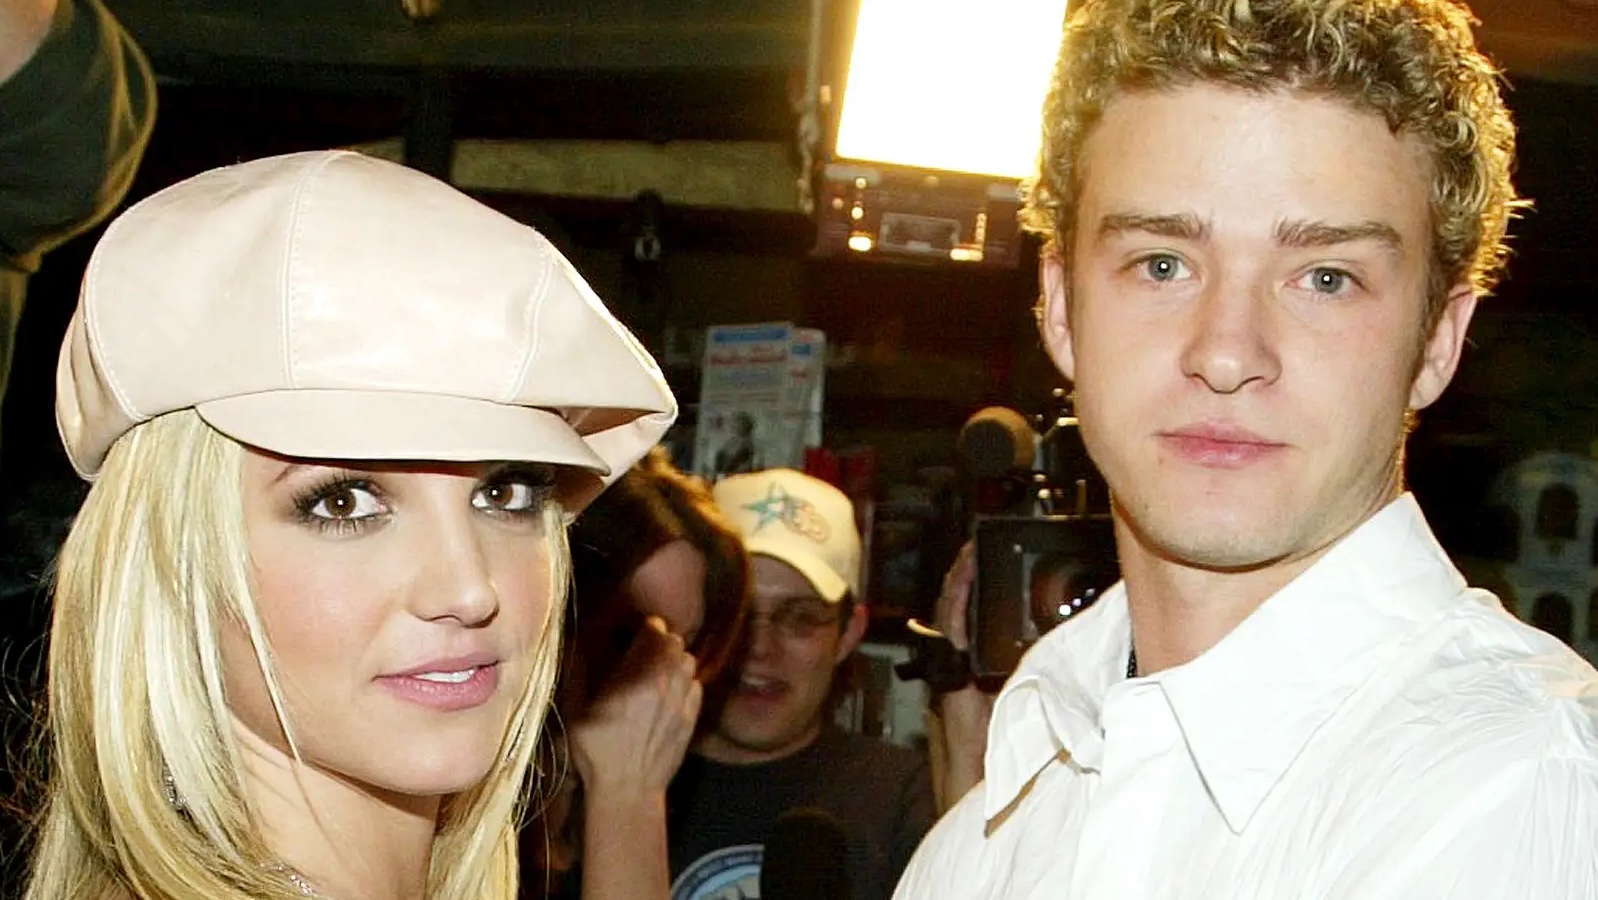 Britney Spears: 'Justin Timberlake's 'Cry Me a River' video turned me into a prostitute'